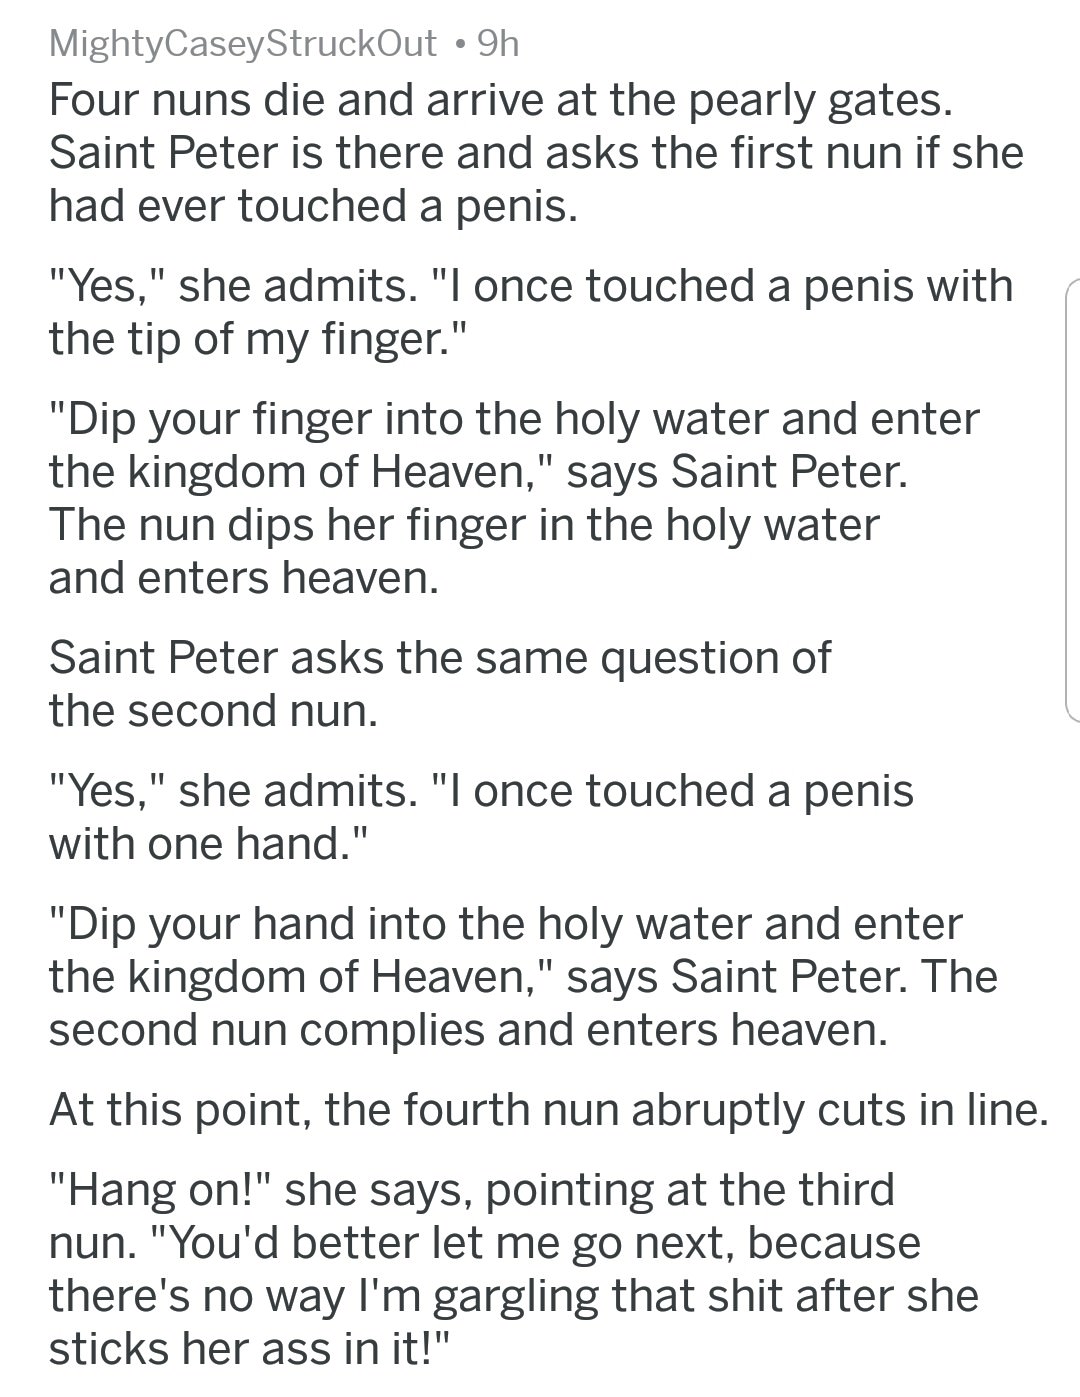 document - MightyCaseyStruckOut 9h Four nuns die and arrive at the pearly gates. Saint Peter is there and asks the first nun if she had ever touched a penis. "Yes," she admits. "I once touched a penis with the tip of my finger." "Dip your finger into the 